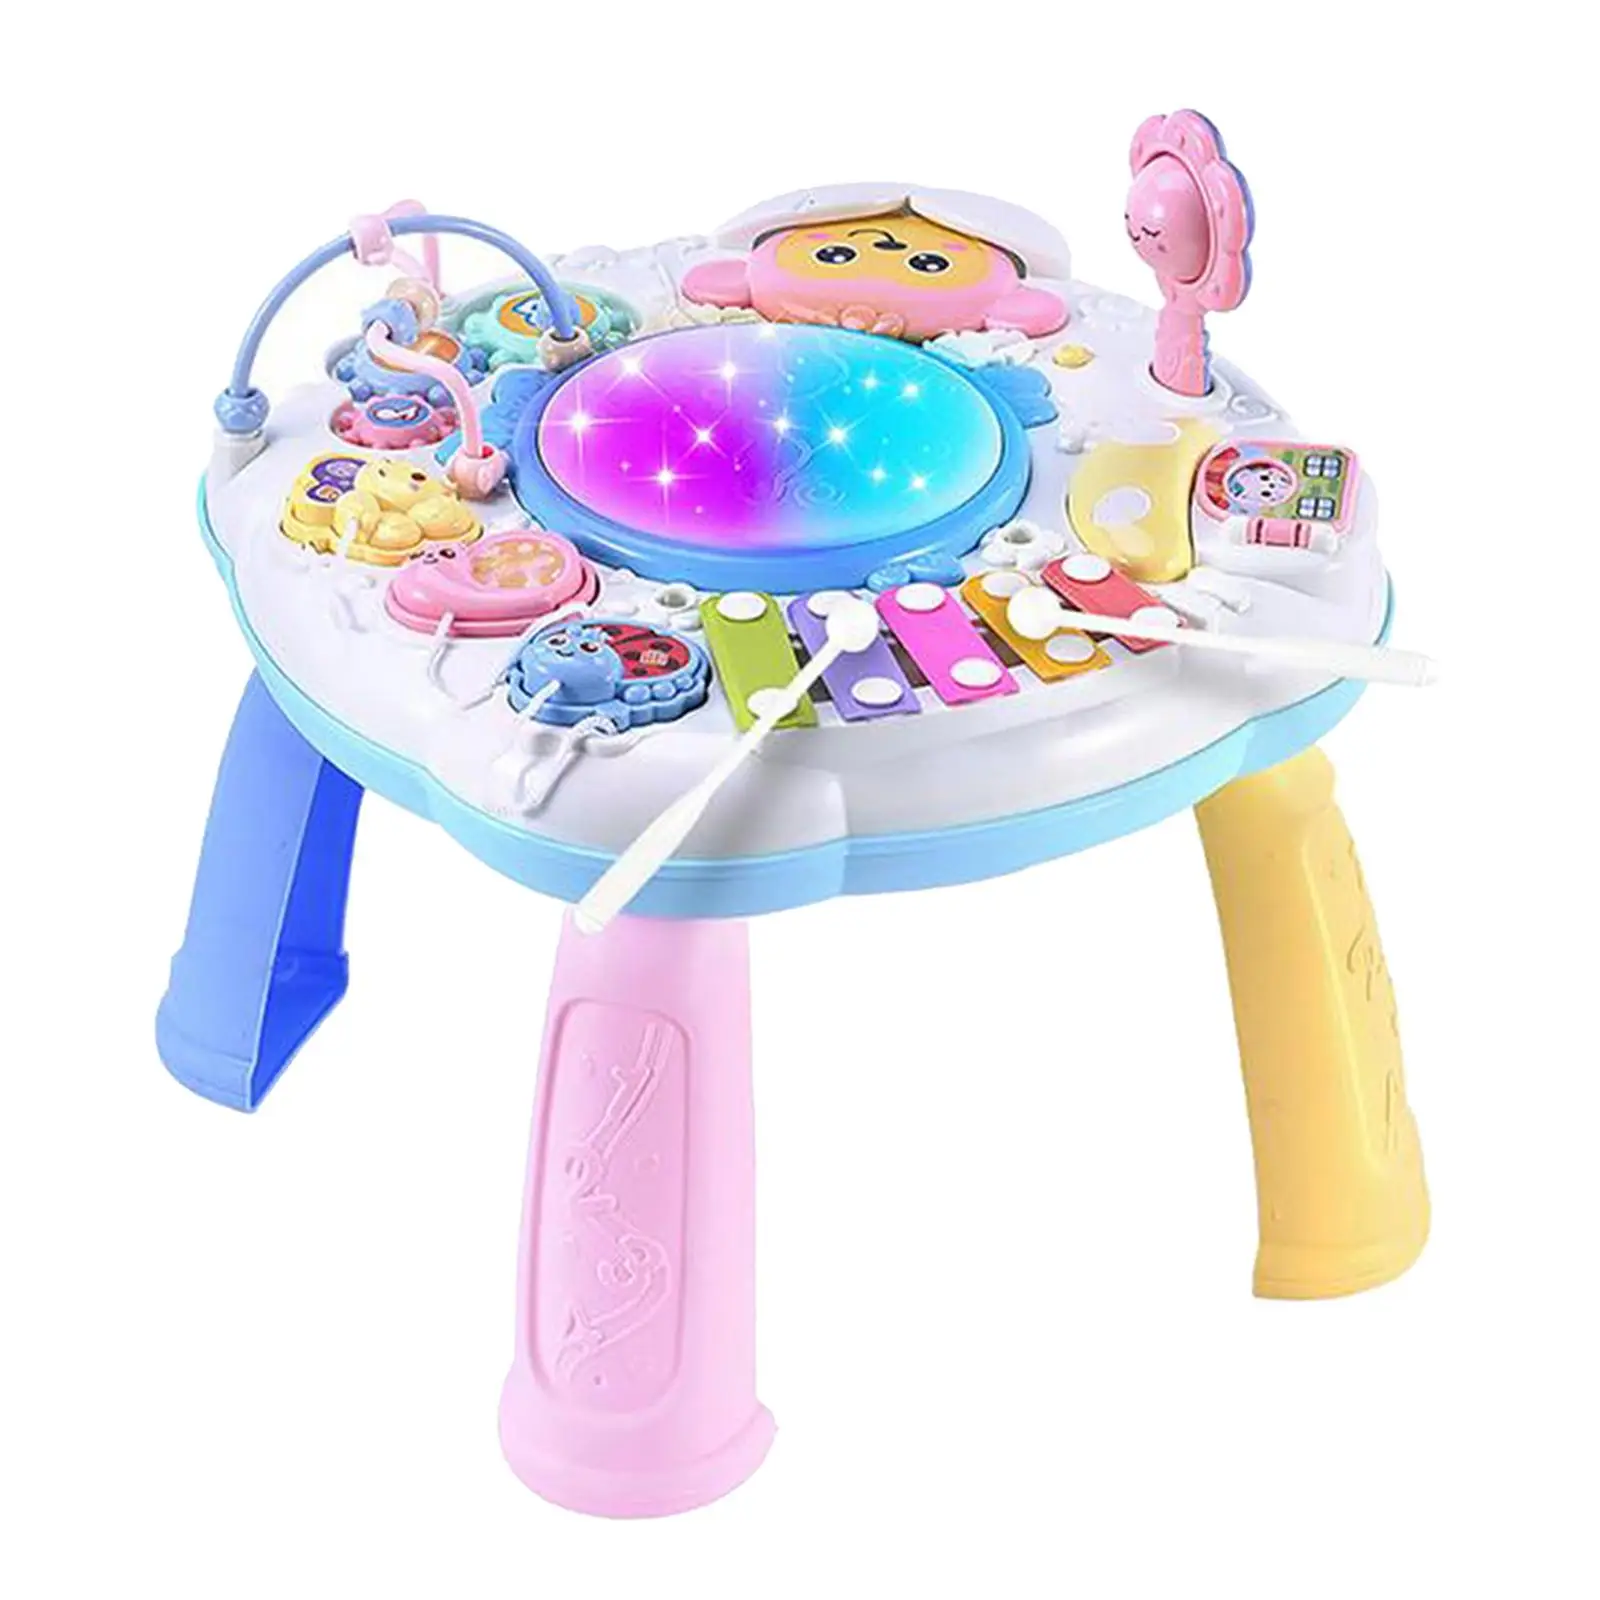 Multifunctional Learning Table Eraly Educational Toy for Children